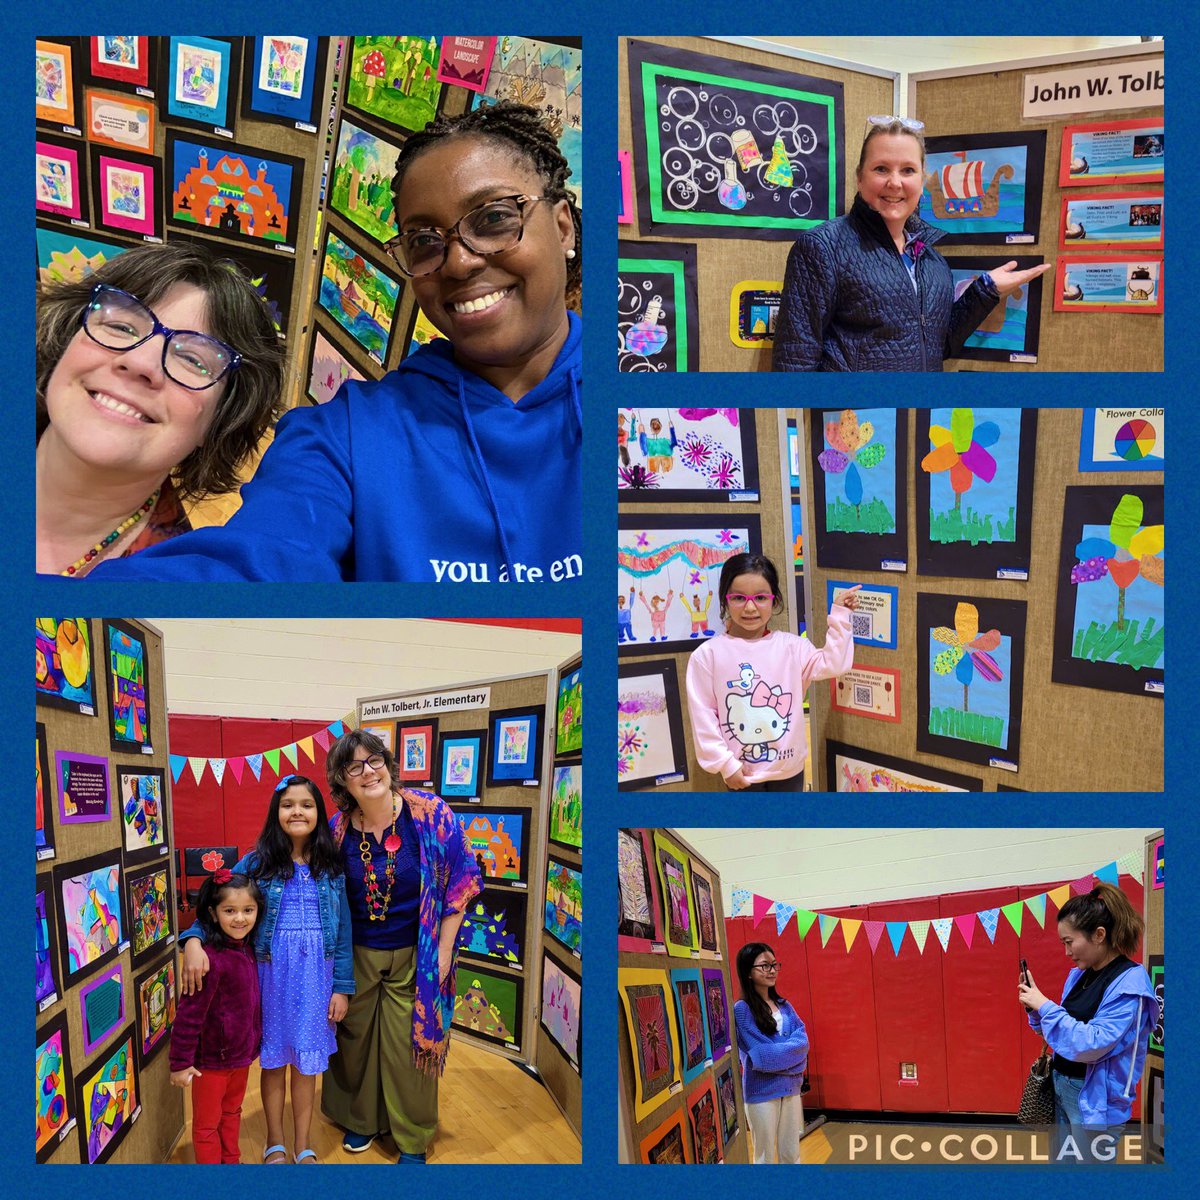 Congratulations to our talented Tolbert artists whose work was showcased at the Heritage Cluster Art Show! A big thank you to everyone who came out to support and admire their creativity.#bettertogether